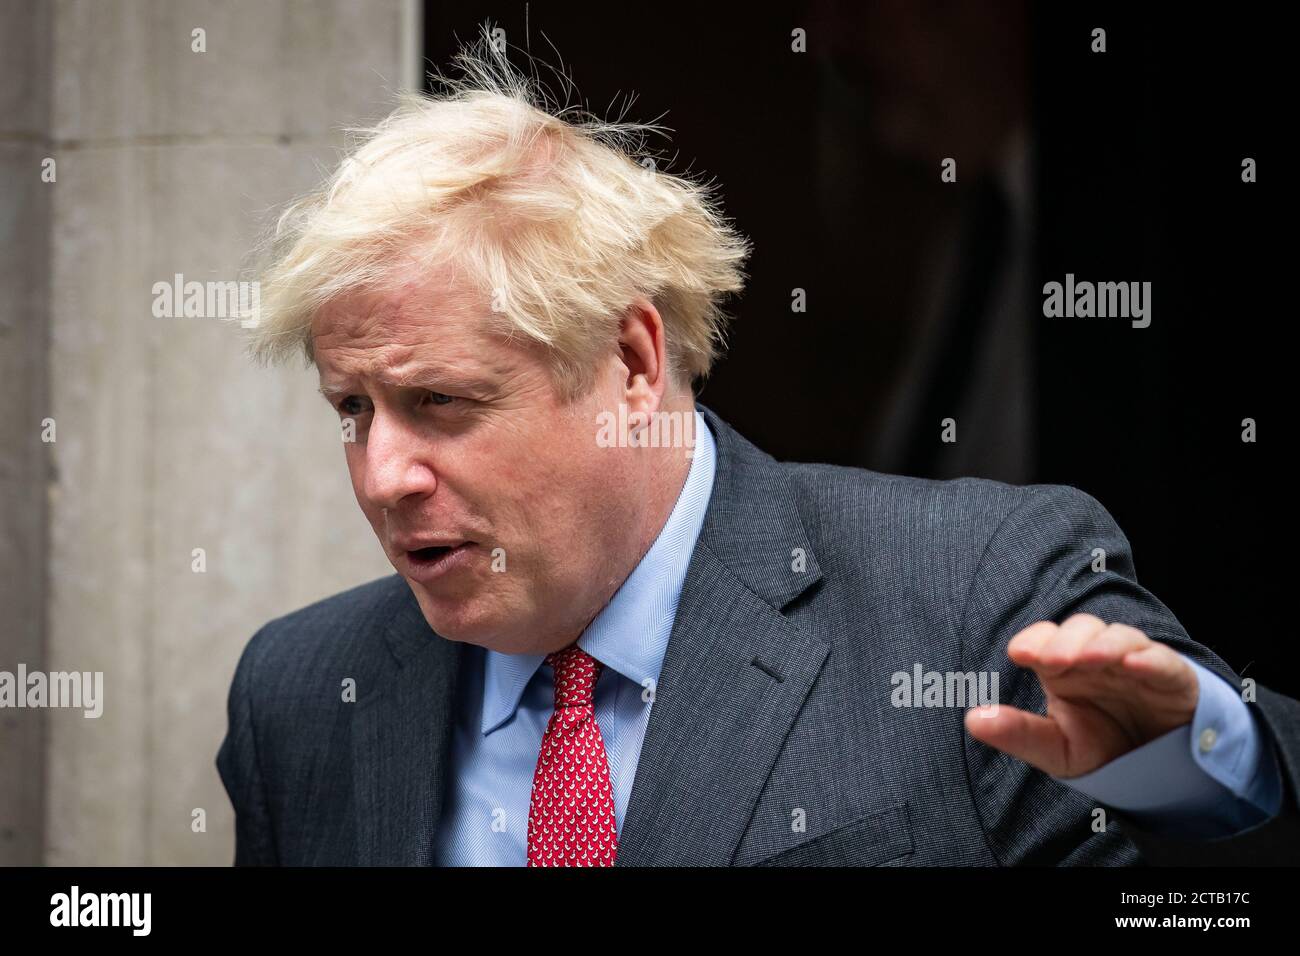 Prime Minister Boris Johnson leaves 10 Downing Street, Westminster, London as he heads to Parliament to appear before MPs to set out steps to tackle a second wave of coronavirus following the stark assessment from Sir Patrick Vallance and England's chief medical officer Professor Chris Whitty. Stock Photo